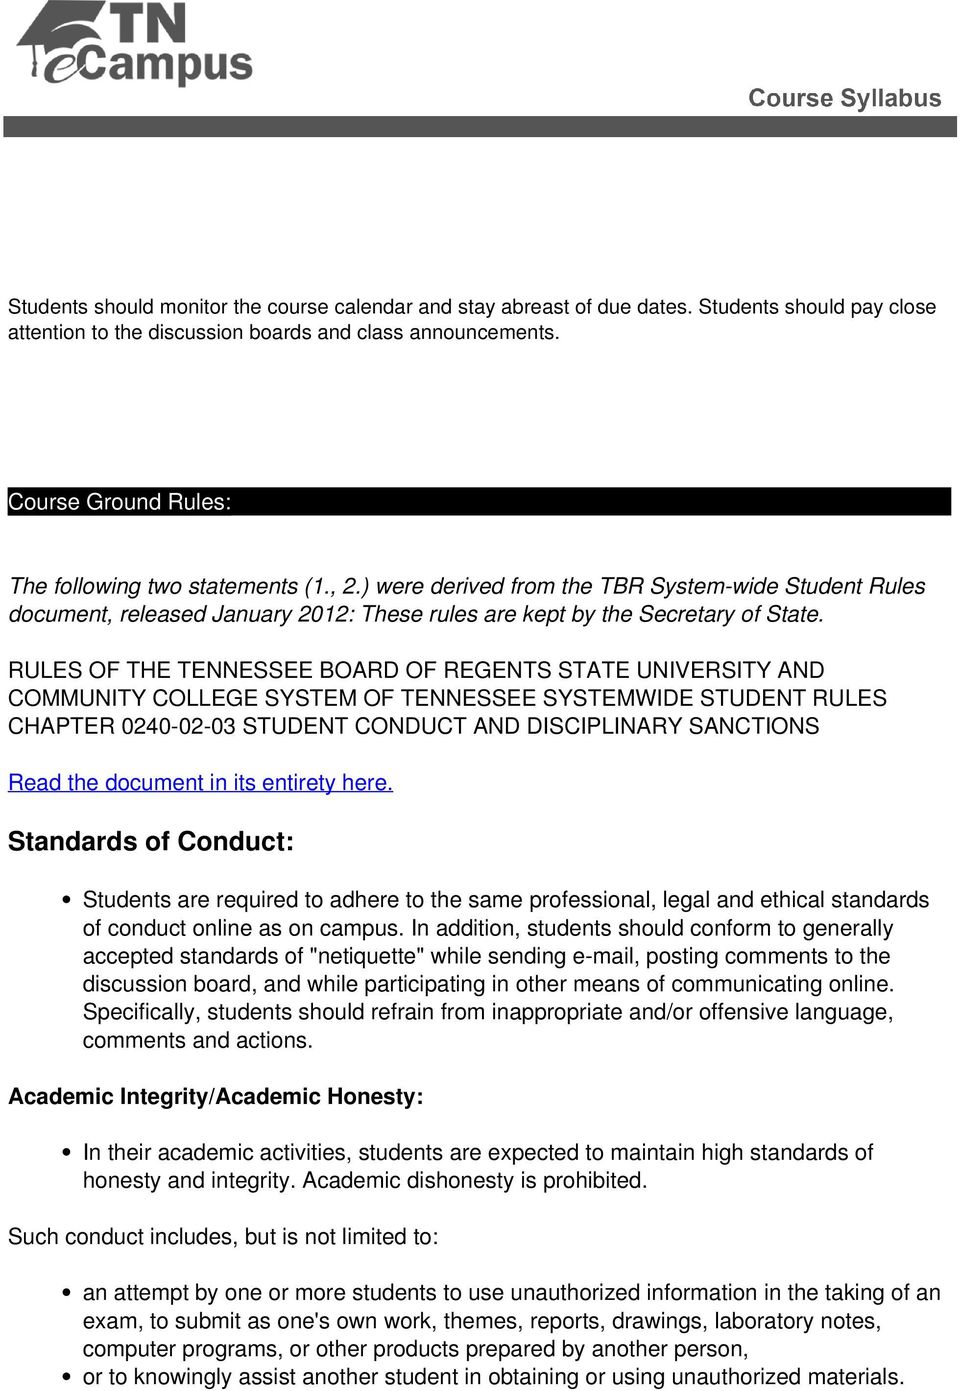 RULES OF THE TENNESSEE BOARD OF REGENTS STATE UNIVERSITY AND COMMUNITY COLLEGE SYSTEM OF TENNESSEE SYSTEMWIDE STUDENT RULES CHAPTER 0240-02-03 STUDENT CONDUCT AND DISCIPLINARY SANCTIONS Read the